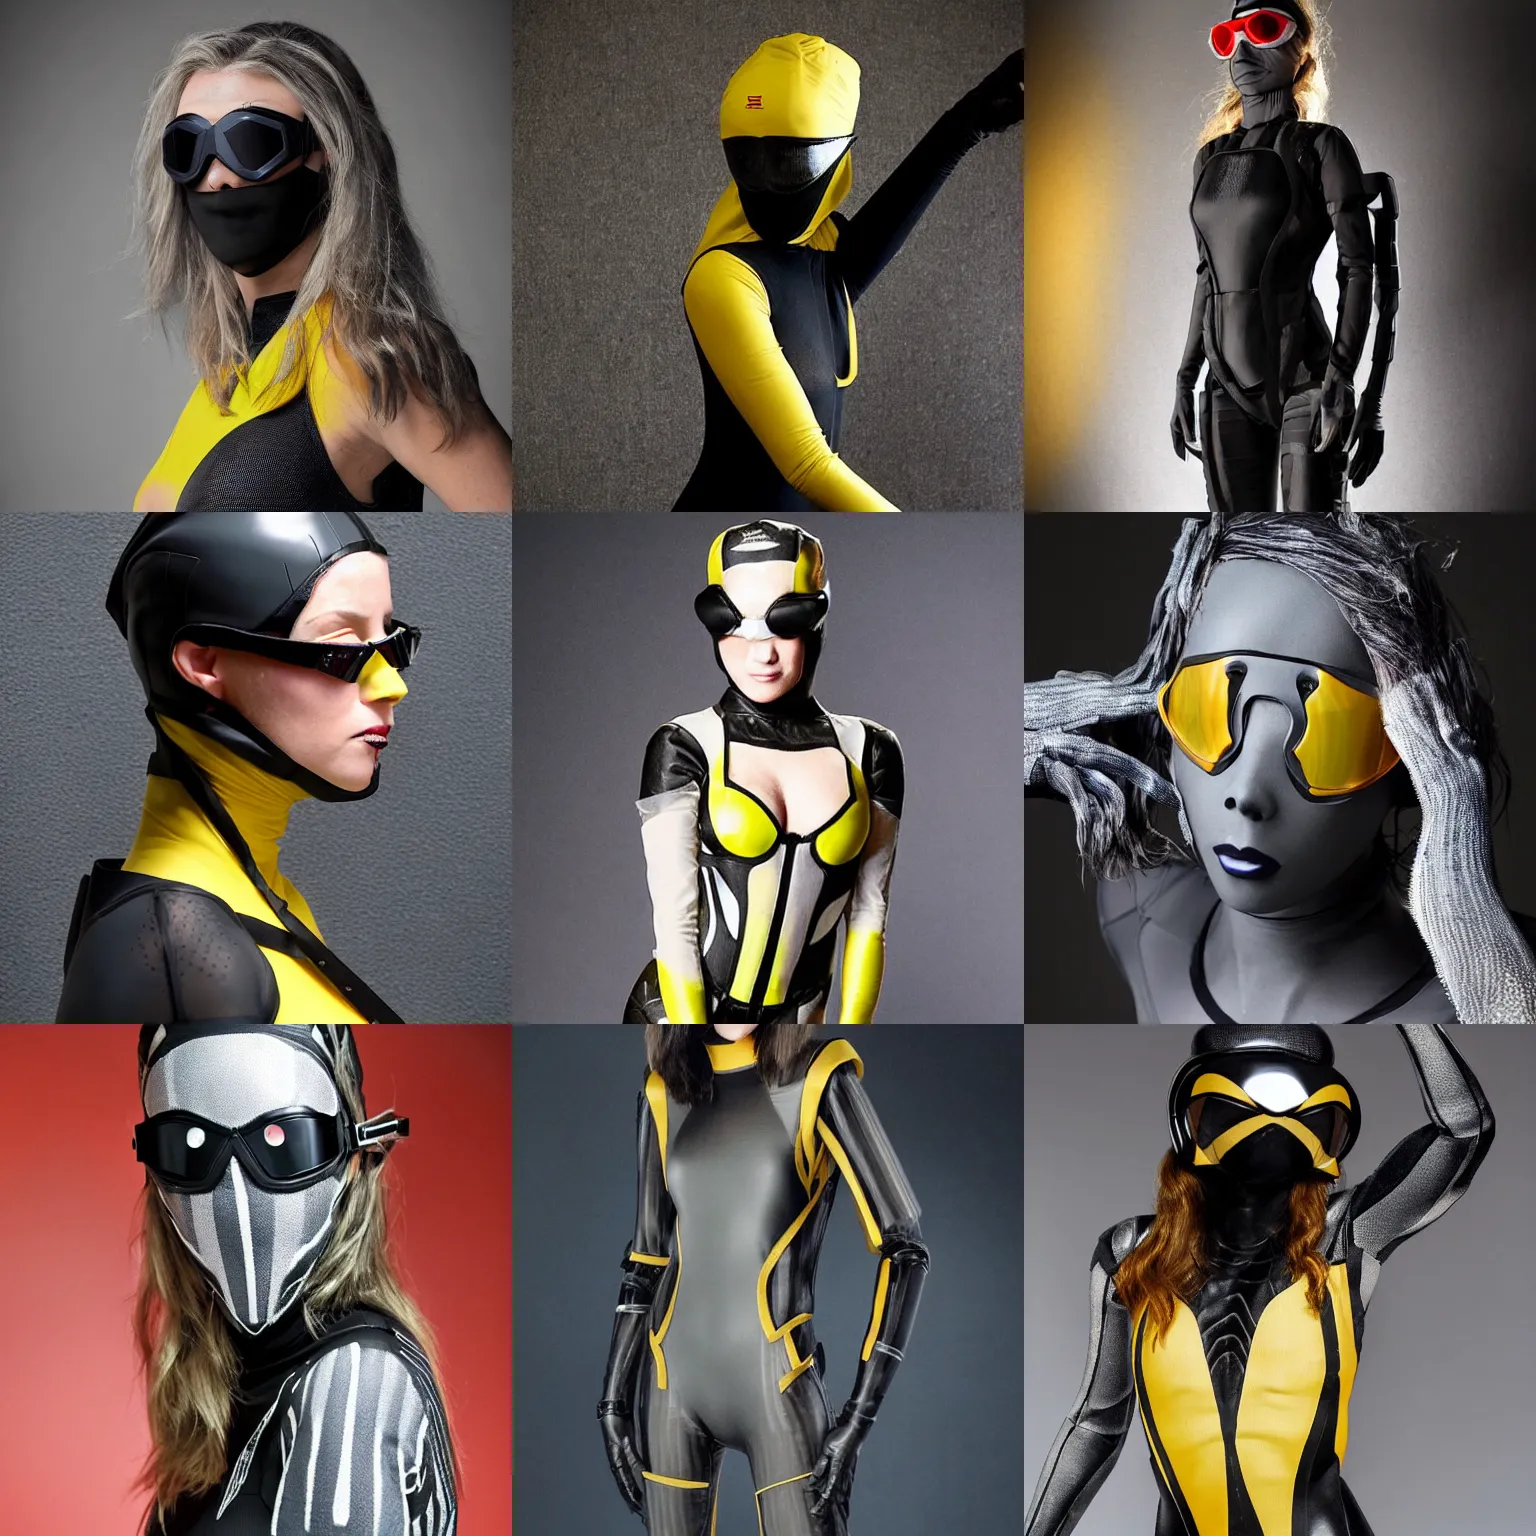 Prompt: As Skitter, Taylor wore various costumes made of spider silk. Initially, she wears a black-and-grey spider silk bodysuit with armor panels made out of insect shells and exoskeletons augmented with more spider silk. She dyes it black with grey paneling before she goes out. The yellow lenses of her mask are durable, high-end swim goggles tinted to help filter out bright lights, with lenses from an old pair of her glasses sealed inside with silicon. Her mask leaves the back of her head uncovered and her hair free to fly behind her. The costume lacks the full extent of the armor paneling she planned, including protection for the back of her head, but the armor covers her face, chest, spine, stomach and major joints (including wrists, shoulders, elbows and knees). Each had \'layers\' resembling a pillbug. The mask design features dull yellow lenses and sections of armor designed to imitate a bug’s mandibles. She kept her costume clean by having bugs eat and clean any waste and wiping it down with a cloth. The spider-silk fabric is too tough to cut with an x-acto knife, although it can be slowly cut through using wire cutters. It was mostly waterproof. Prior to dying, the costume\'s prototype had fabric that was a dirty yellow-gray color, and the armour was naturally a dark mottled brown-gray. Full body portrait, full body portrait, comic book style, comic book hero, comic book character